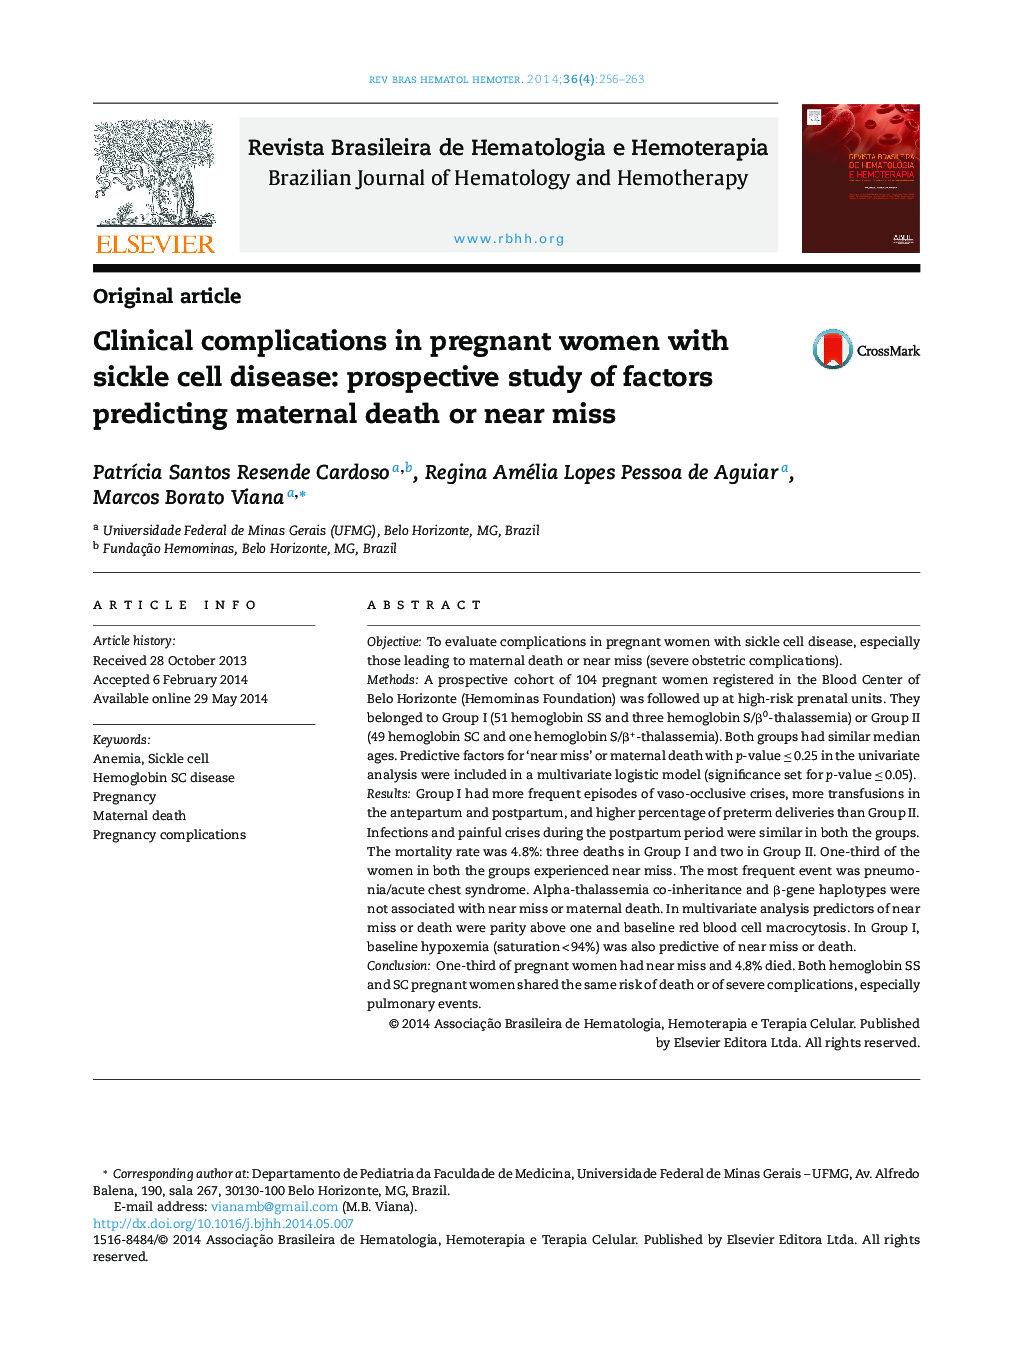 Clinical complications in pregnant women with sickle cell disease: prospective study of factors predicting maternal death or near miss